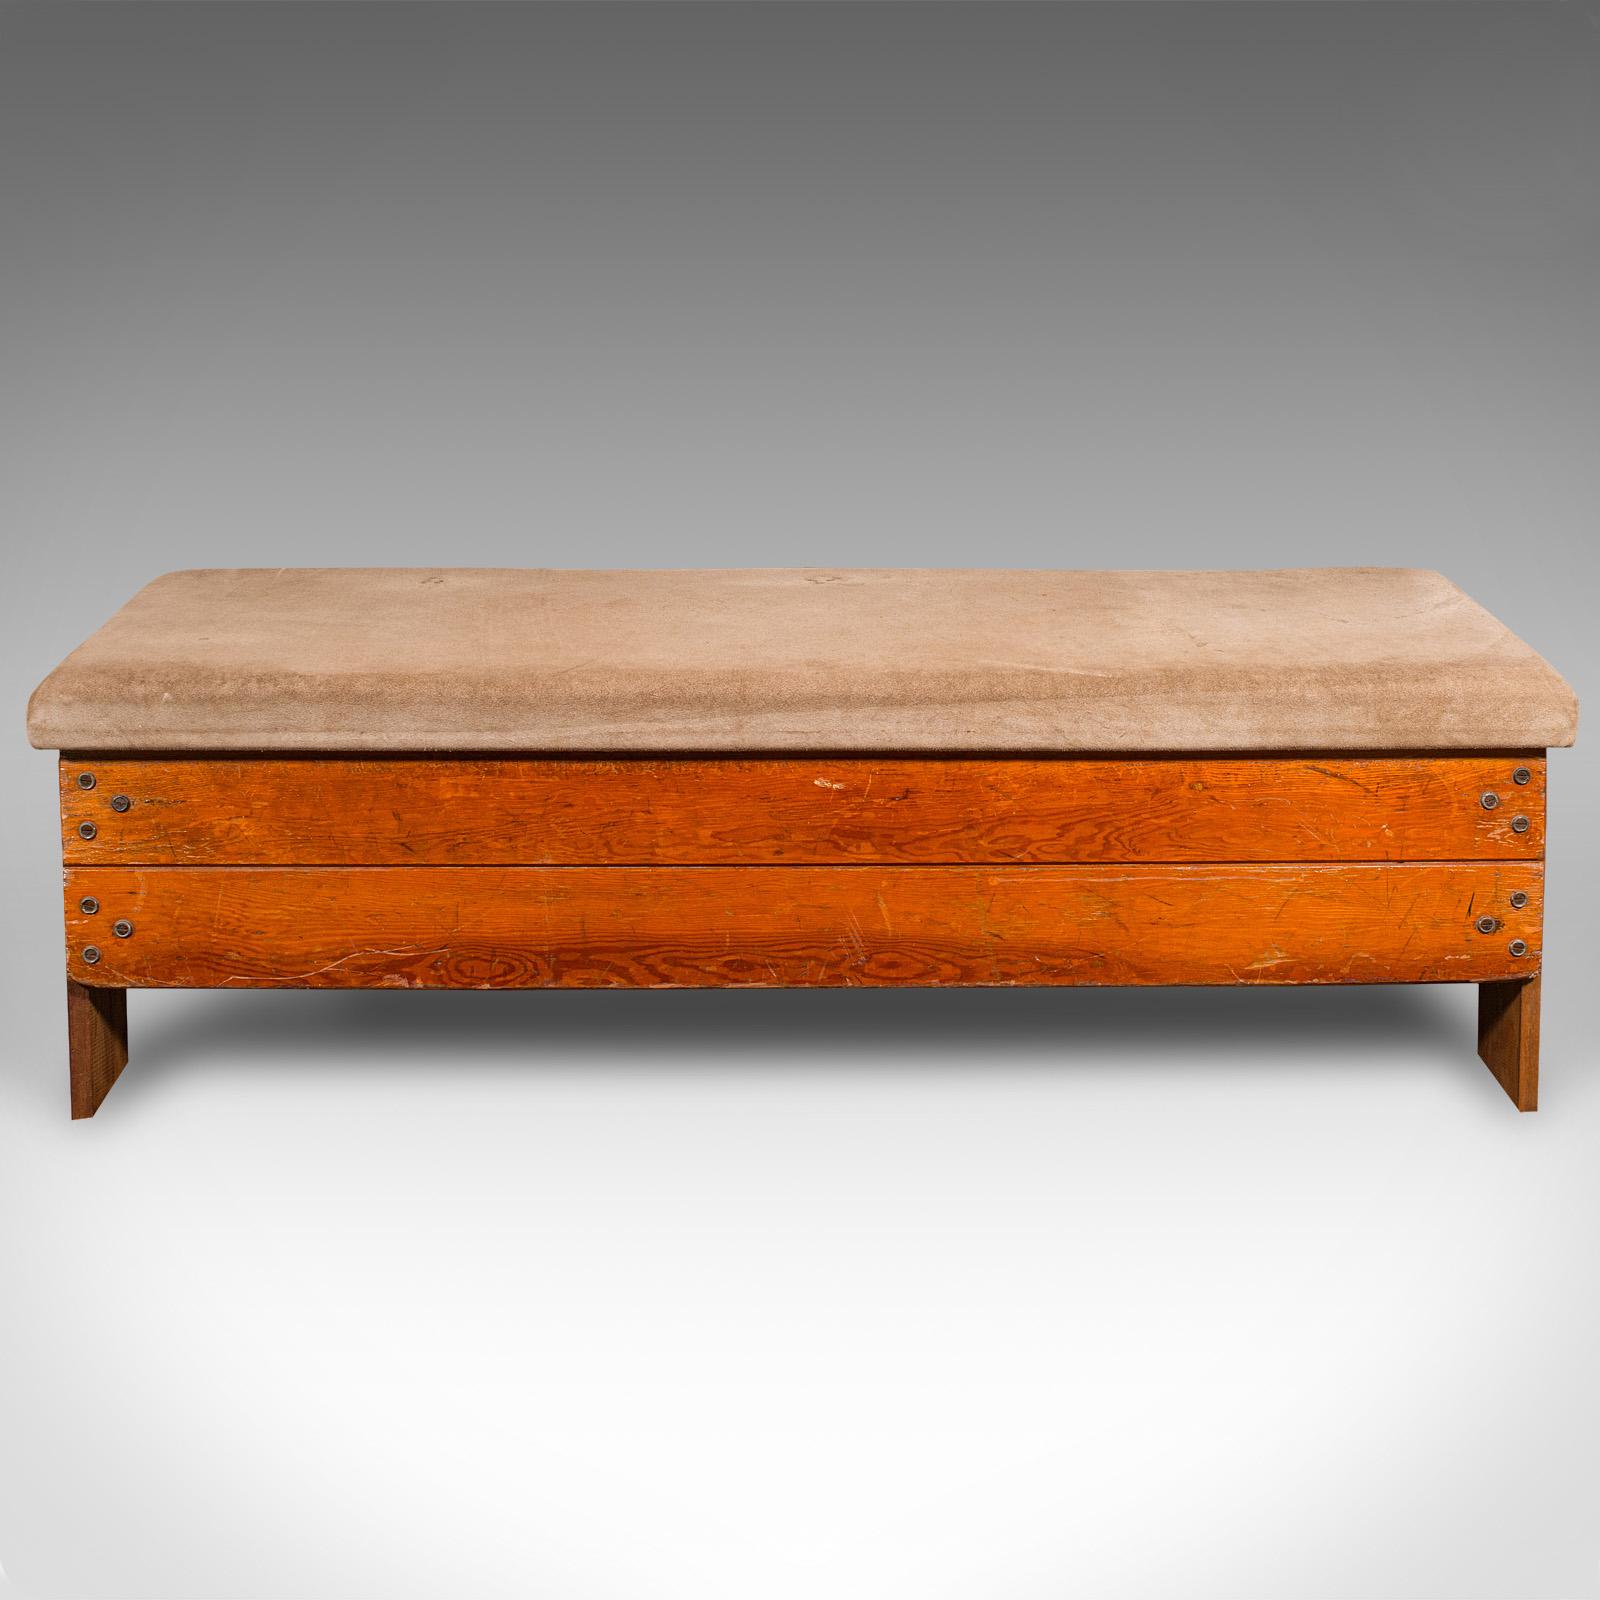 This is an antique gymnasium bench. An English, pine and suede window seat, dating to the early 20th century, circa 1920.

Versatile bench graced with character, quality and nostalgic appeal
Displays a desirable aged patina and in good order
Pine